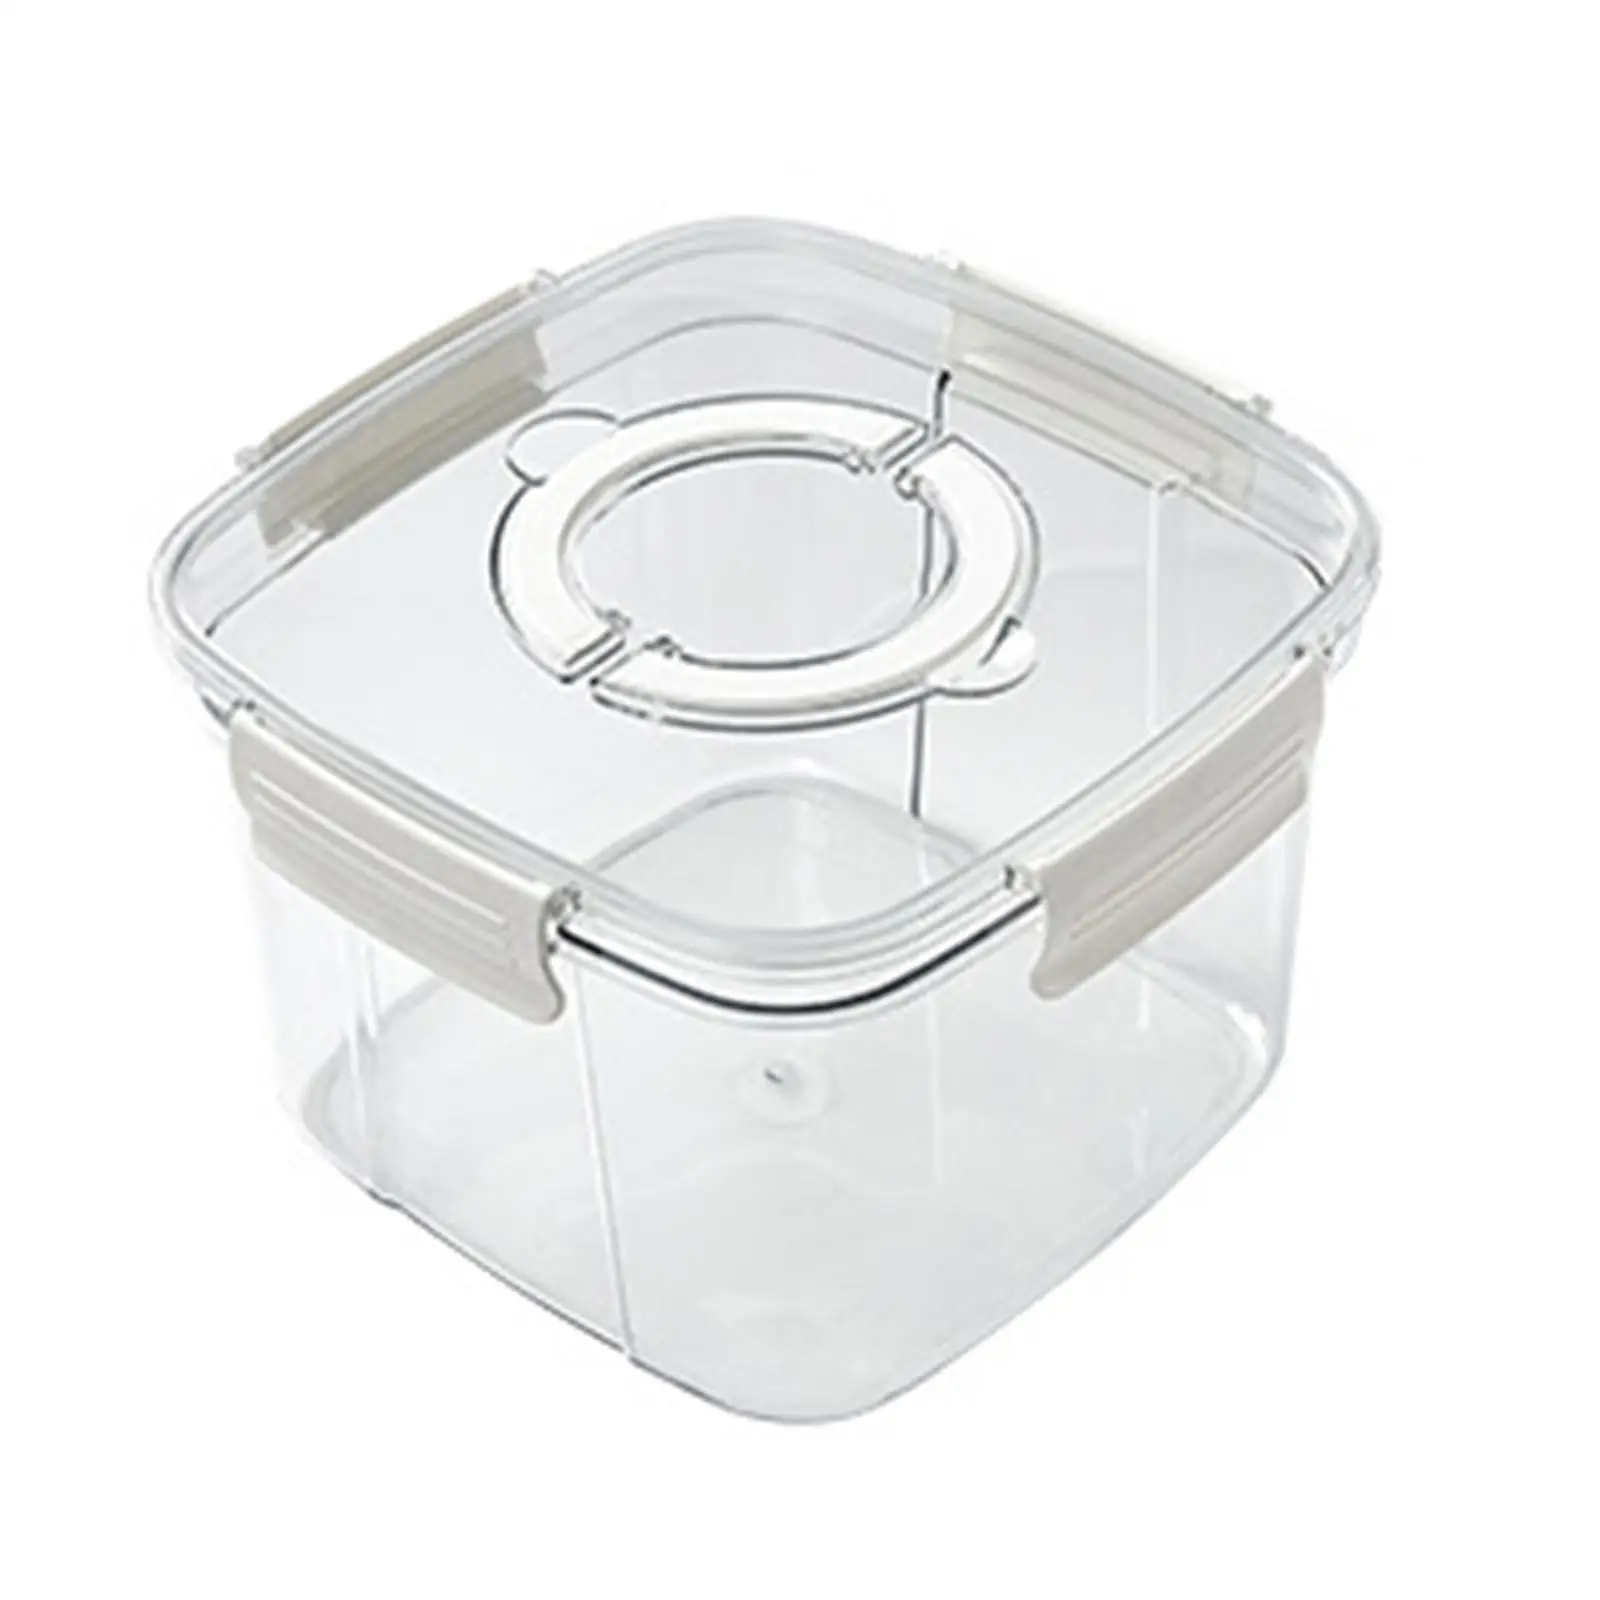 Food Container with The Cup Large Capacity Rice Dispenser Multipurpose Rice Bin for Cupboard Countertop Flour Snacks Rice